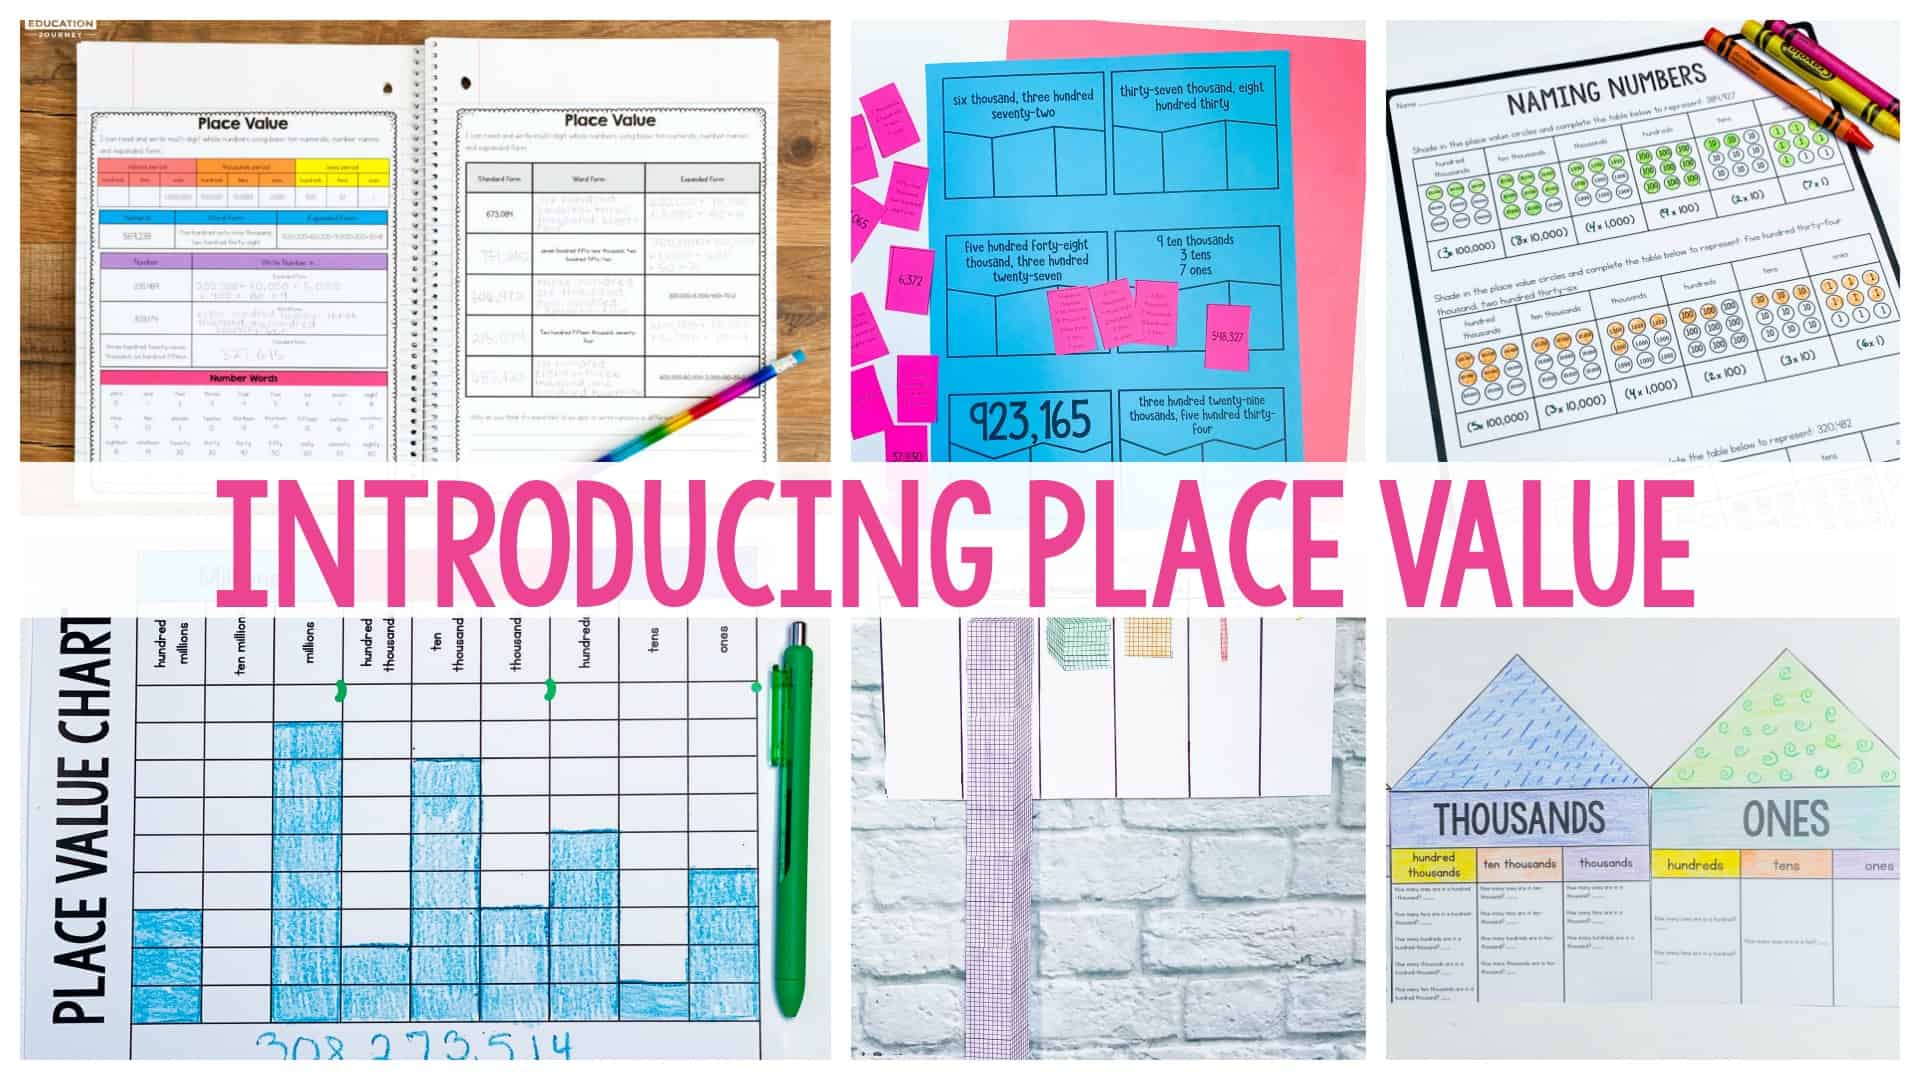 Introducing place value header image with worksheets in the background